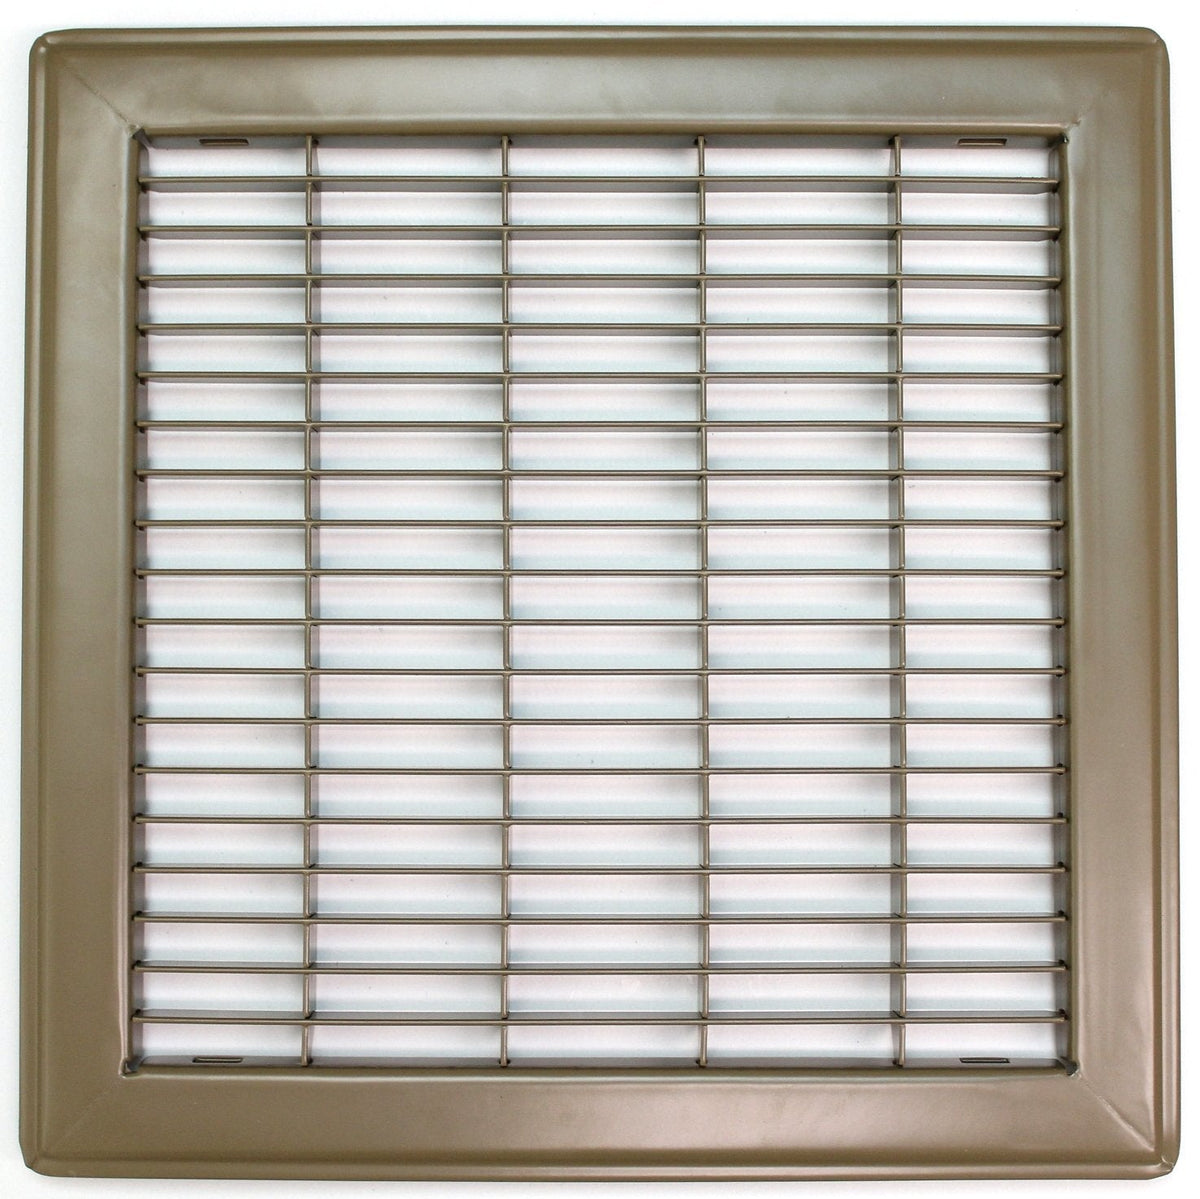 10&quot; X 10&quot; Heavy Duty Floor Grille - Fixed Blades Air Grille - Brown [Outer Dimensions: 11.75 X 11.75]